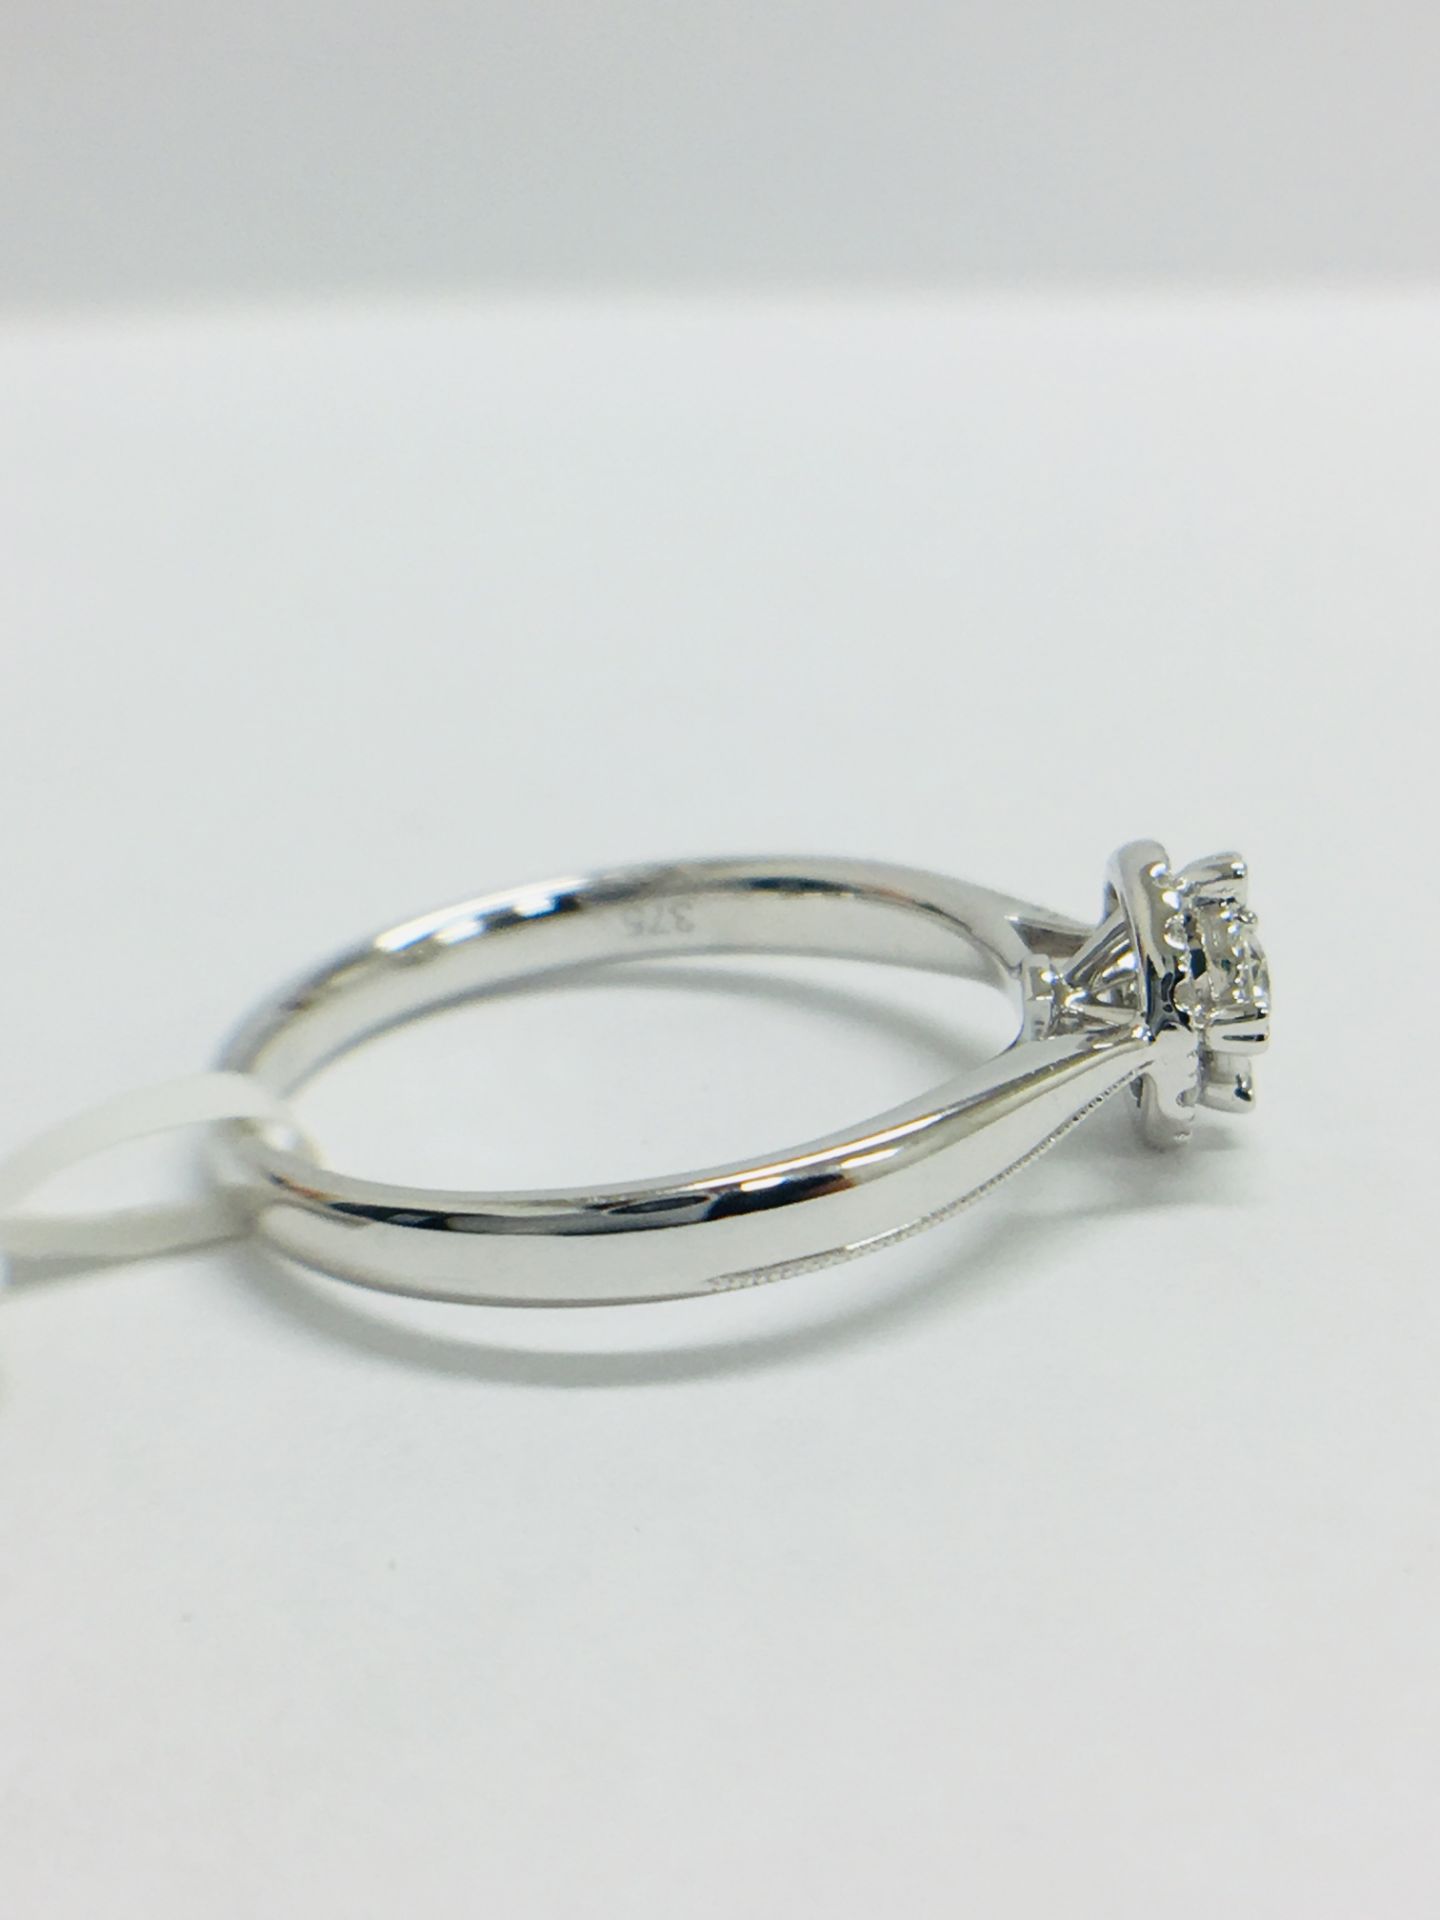 9CT White Gold diamond Solitaire illusion set ring with a millegrain edge shank - Image 8 of 11